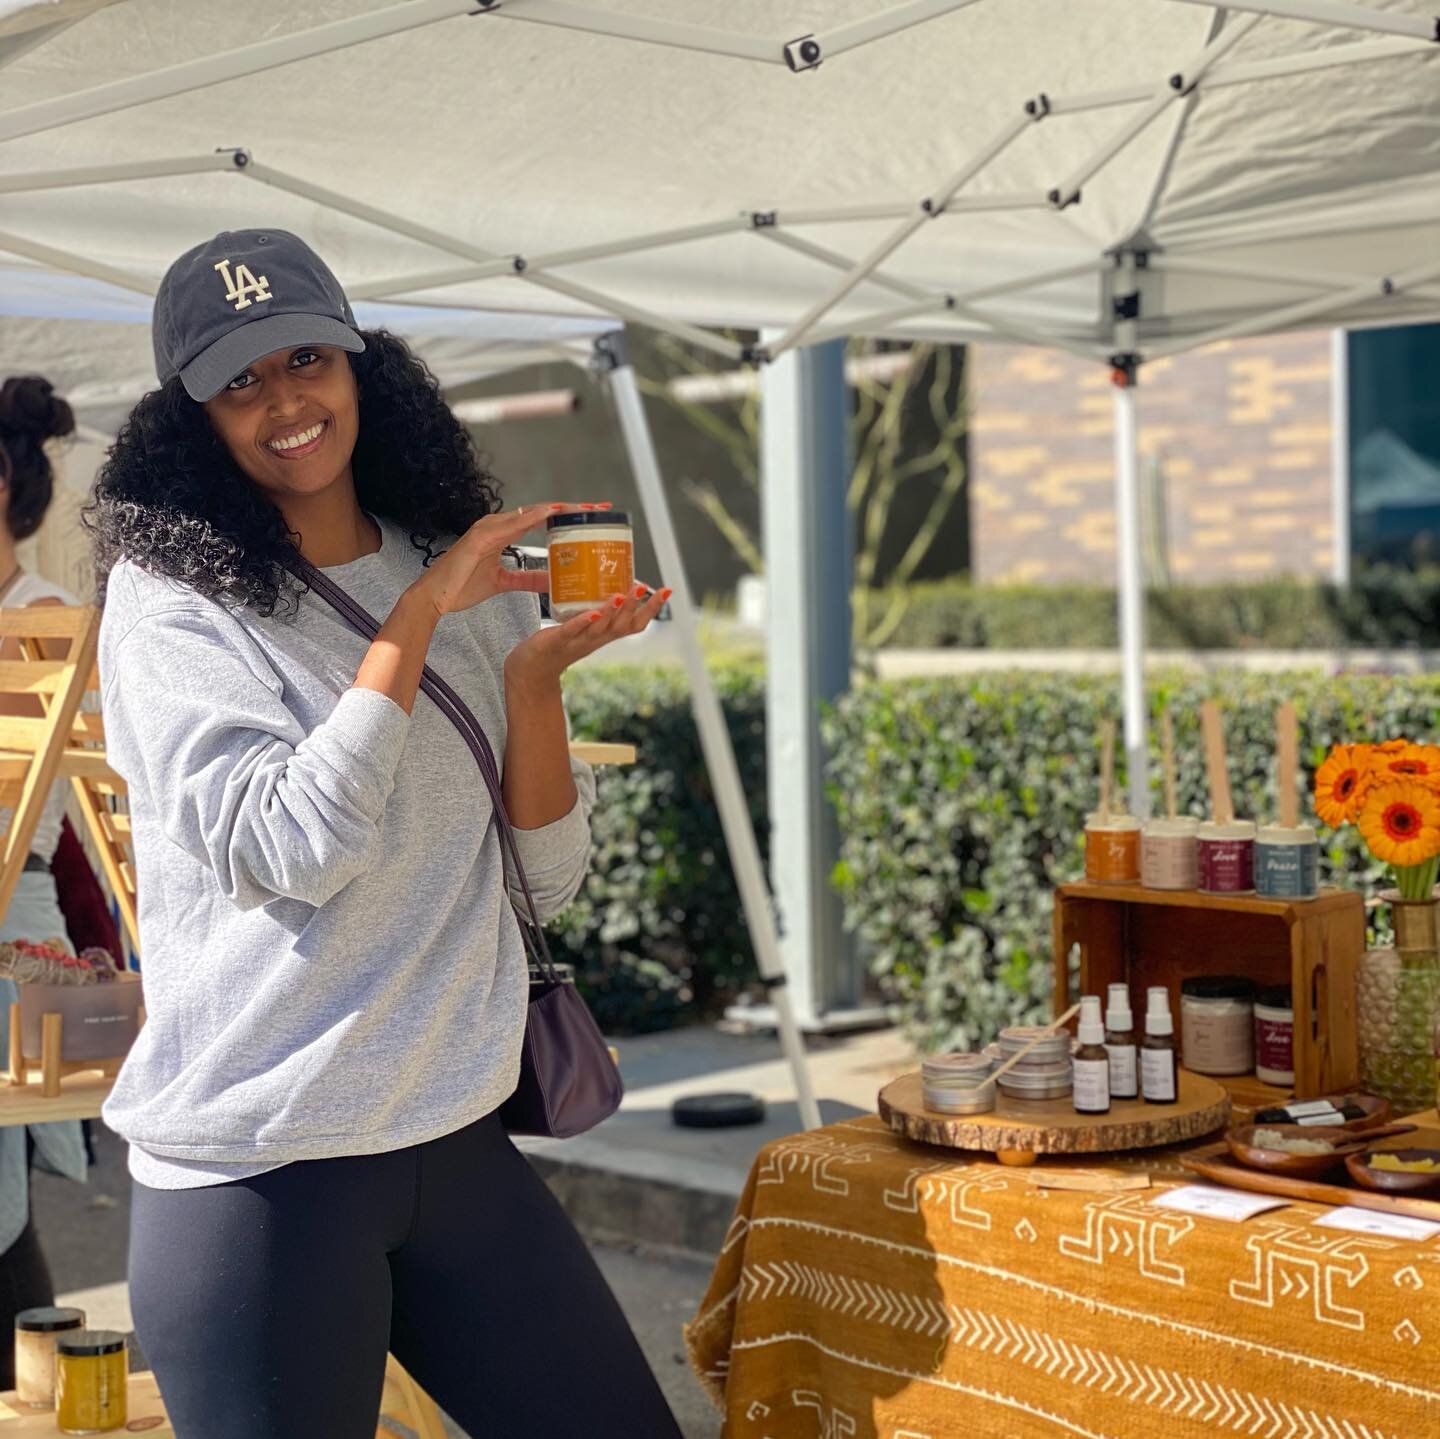 I appreciate you all so much, it felt  amazing to be back at the market. 🧡
.
.
#nature #health #entrepreneurship  #relax #natural #nurture #apothecary #plants #beauty #spiritual #journey #explorerpage #viral #reels #explorer #love #lifestyle #wellne